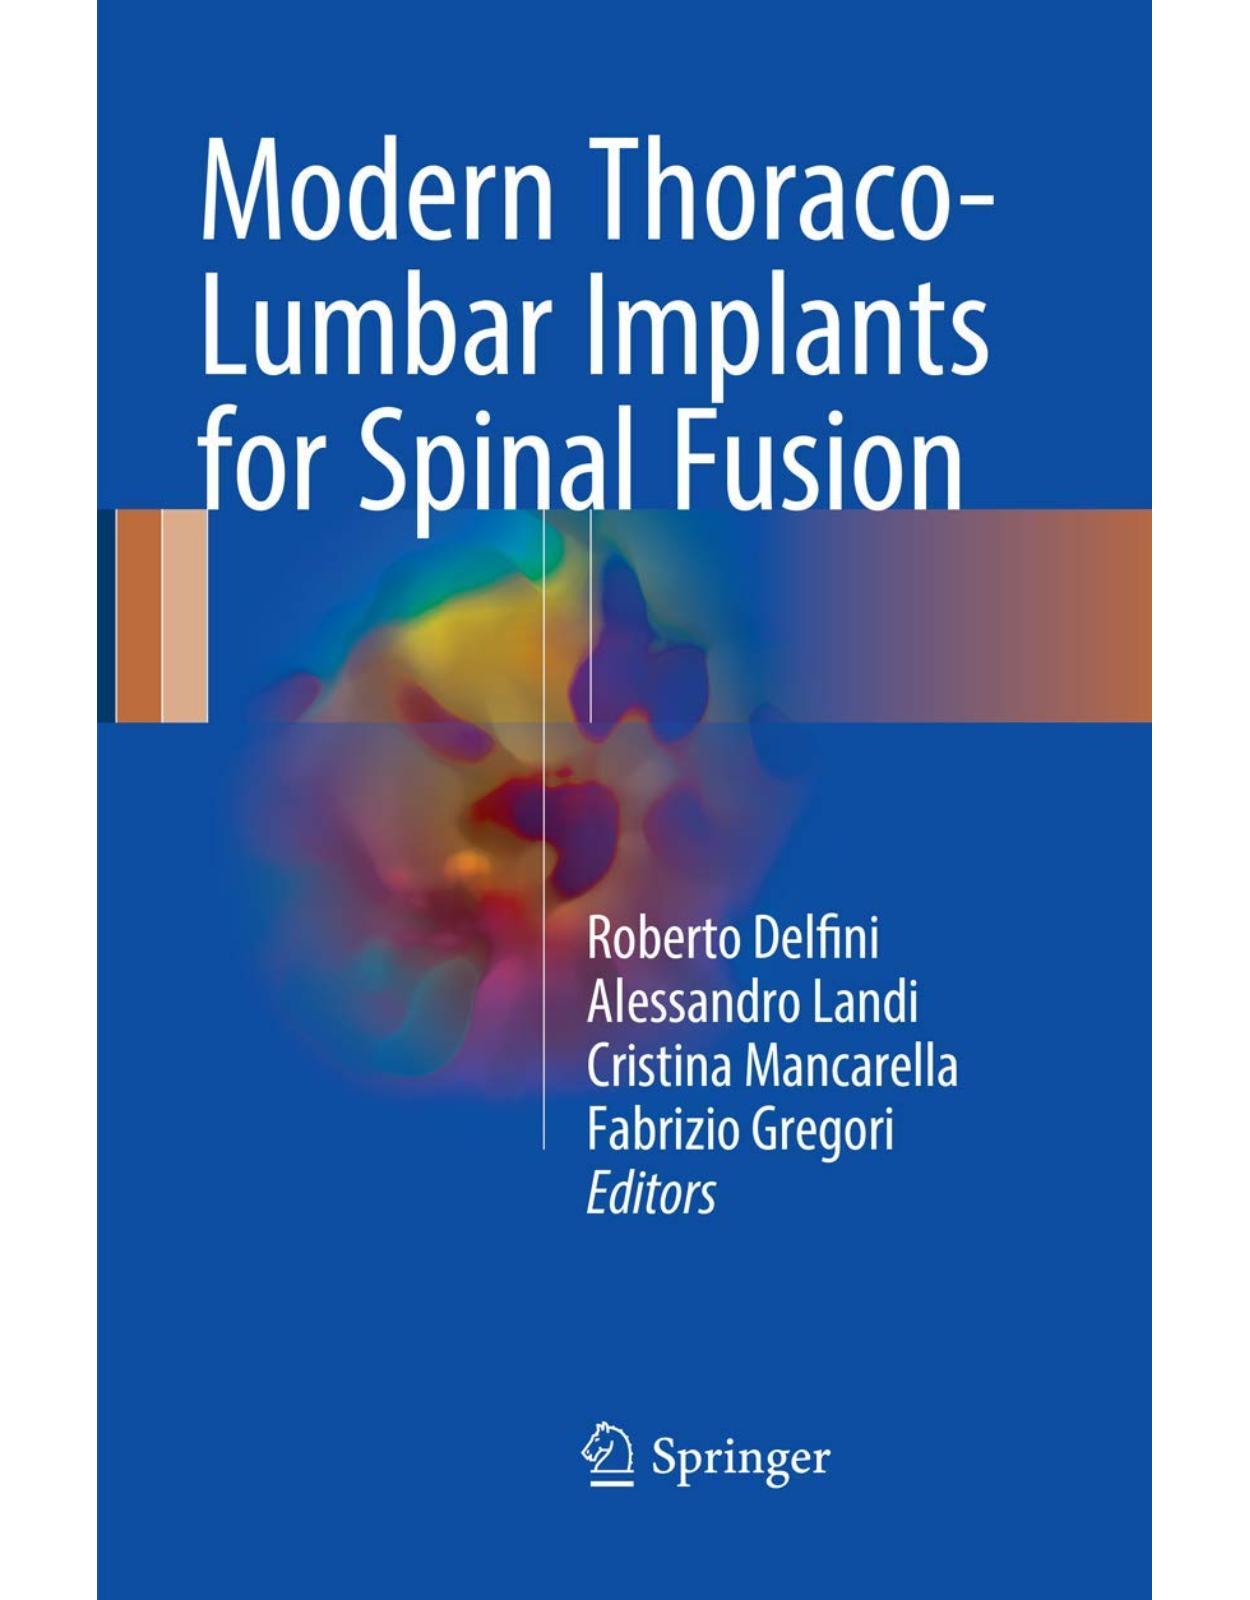 Modern Thoraco-Lumbar Implants for Spinal Fusion